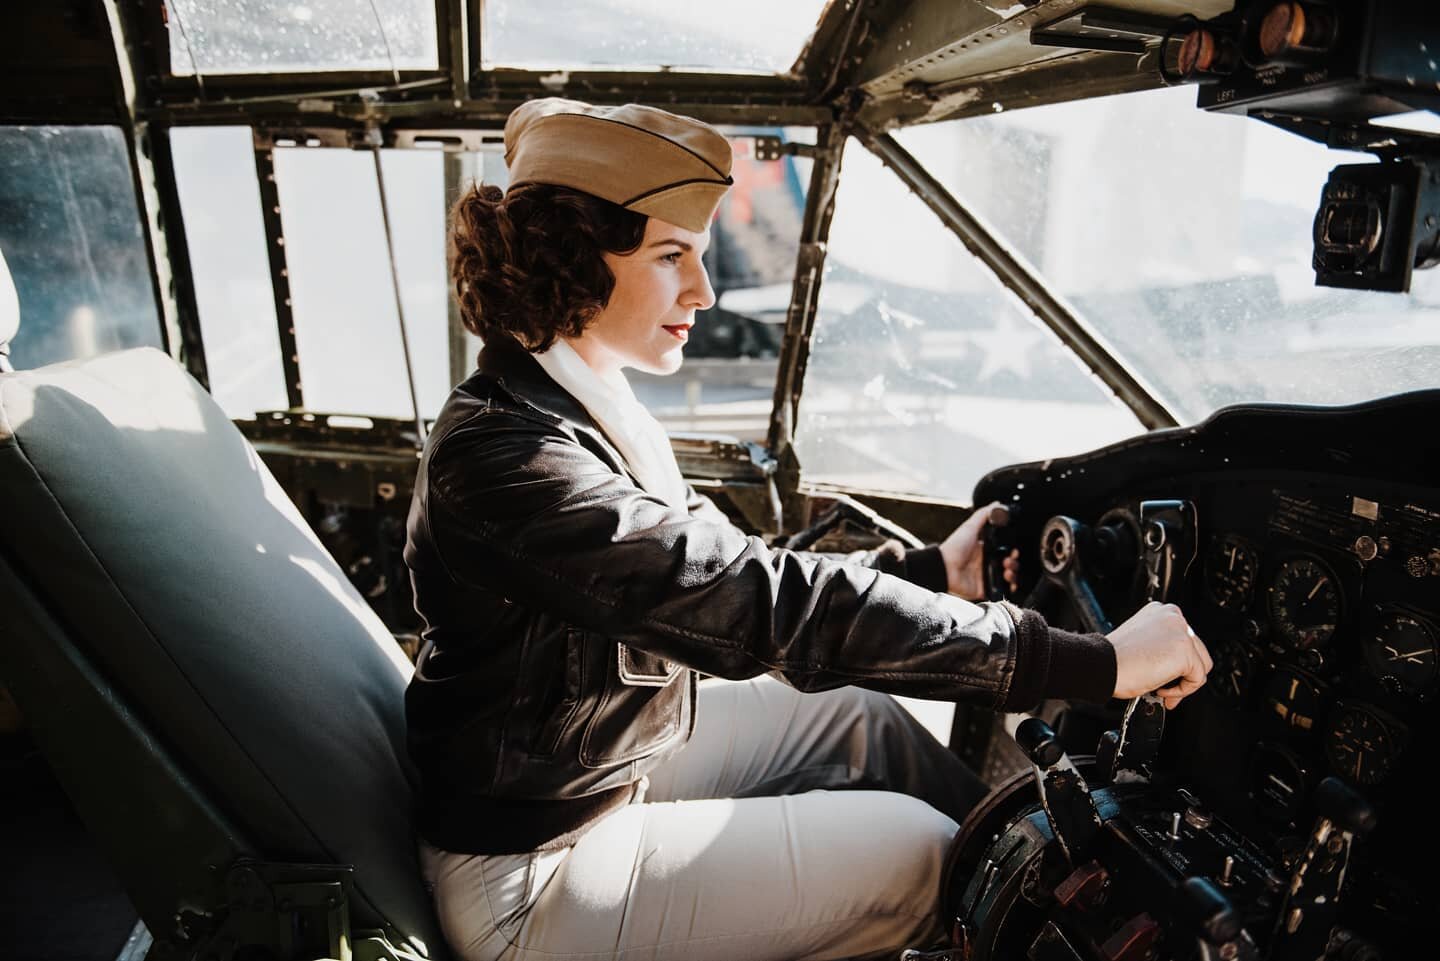 It's the start of a new week...are you in the pilot's seat? 🛩️
.
.
.
.
#mondaymotivation #mondaythoughts #newweekvibes #aviationlovers #aviation #pilotview #cockpitviews #classicaviation #vintagestyle #nostalgia #vintagefashion